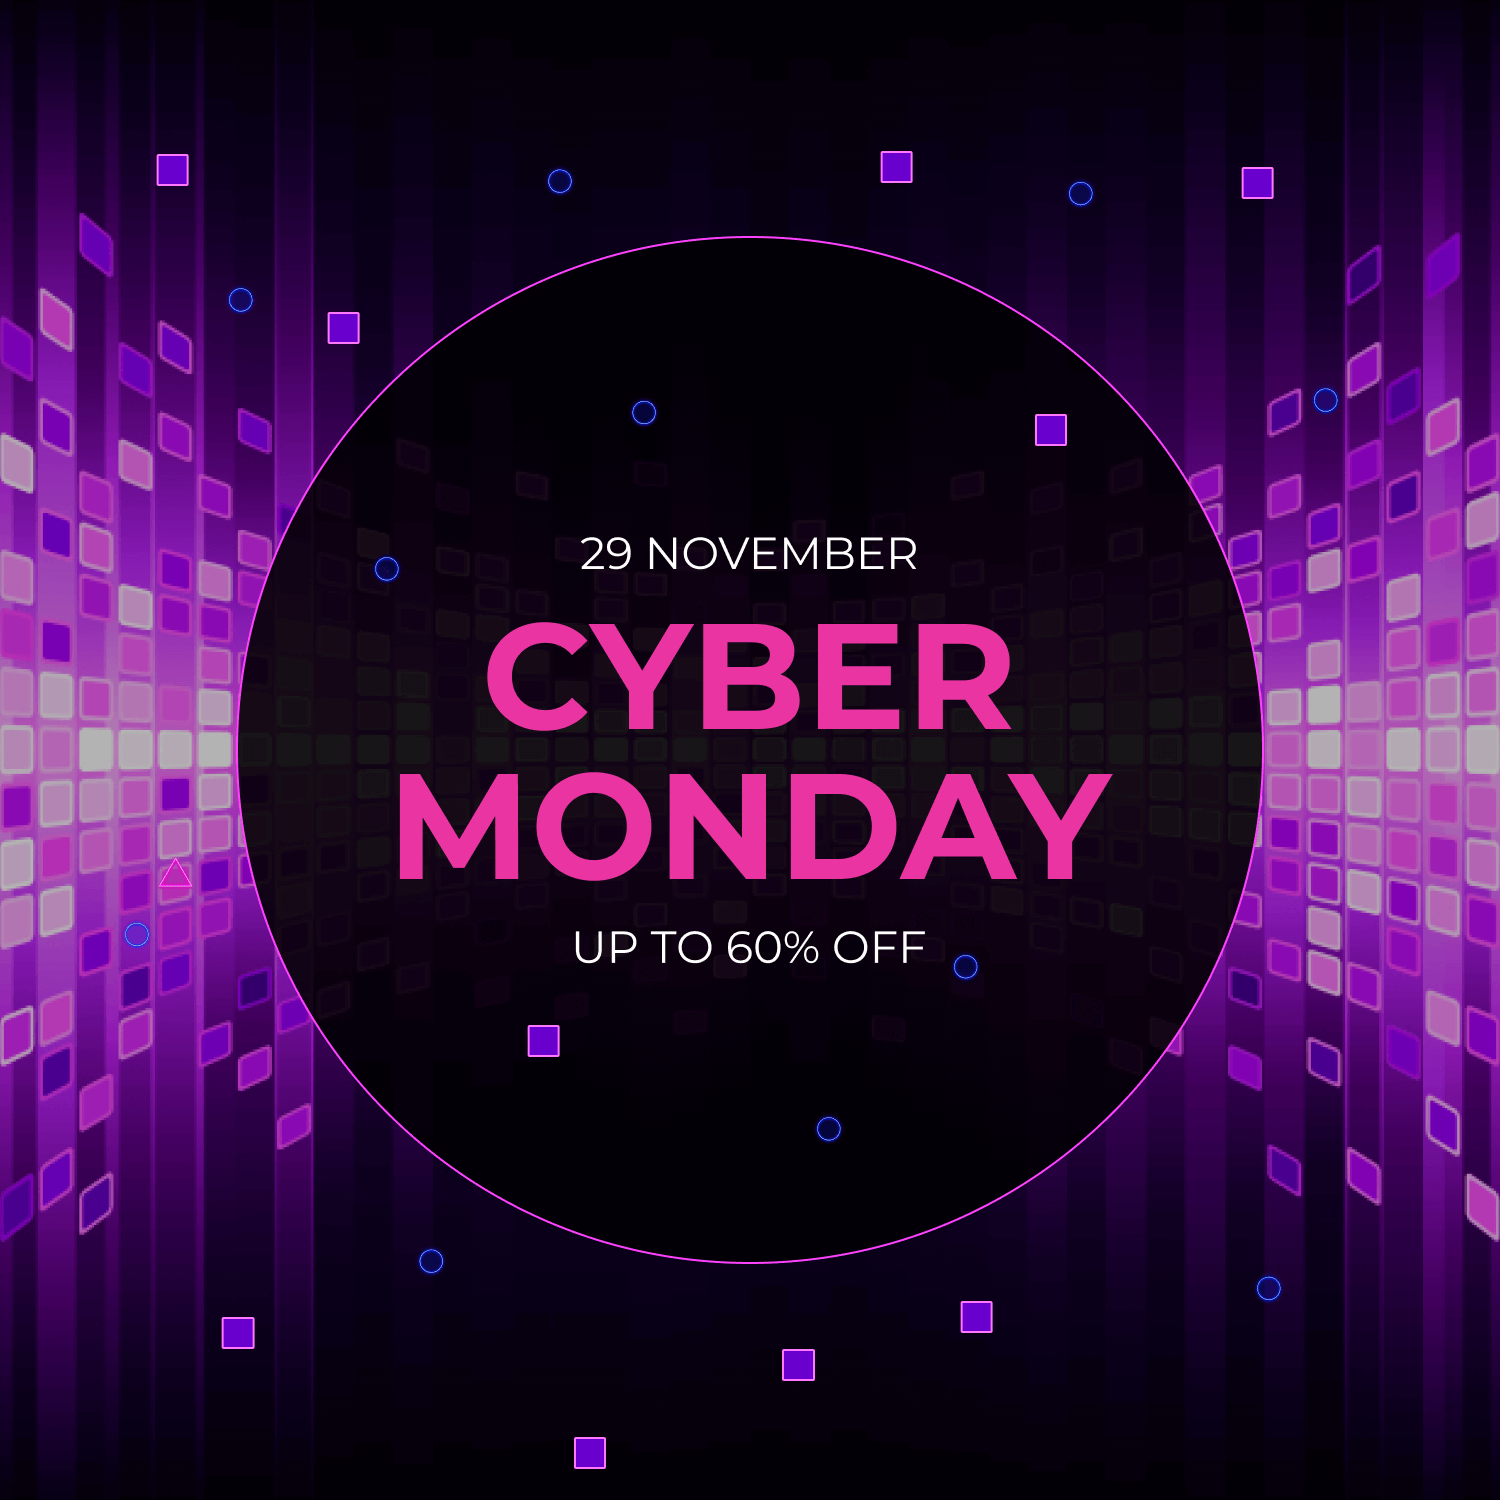 Pink Cyber Monday Sale Designs cover image.